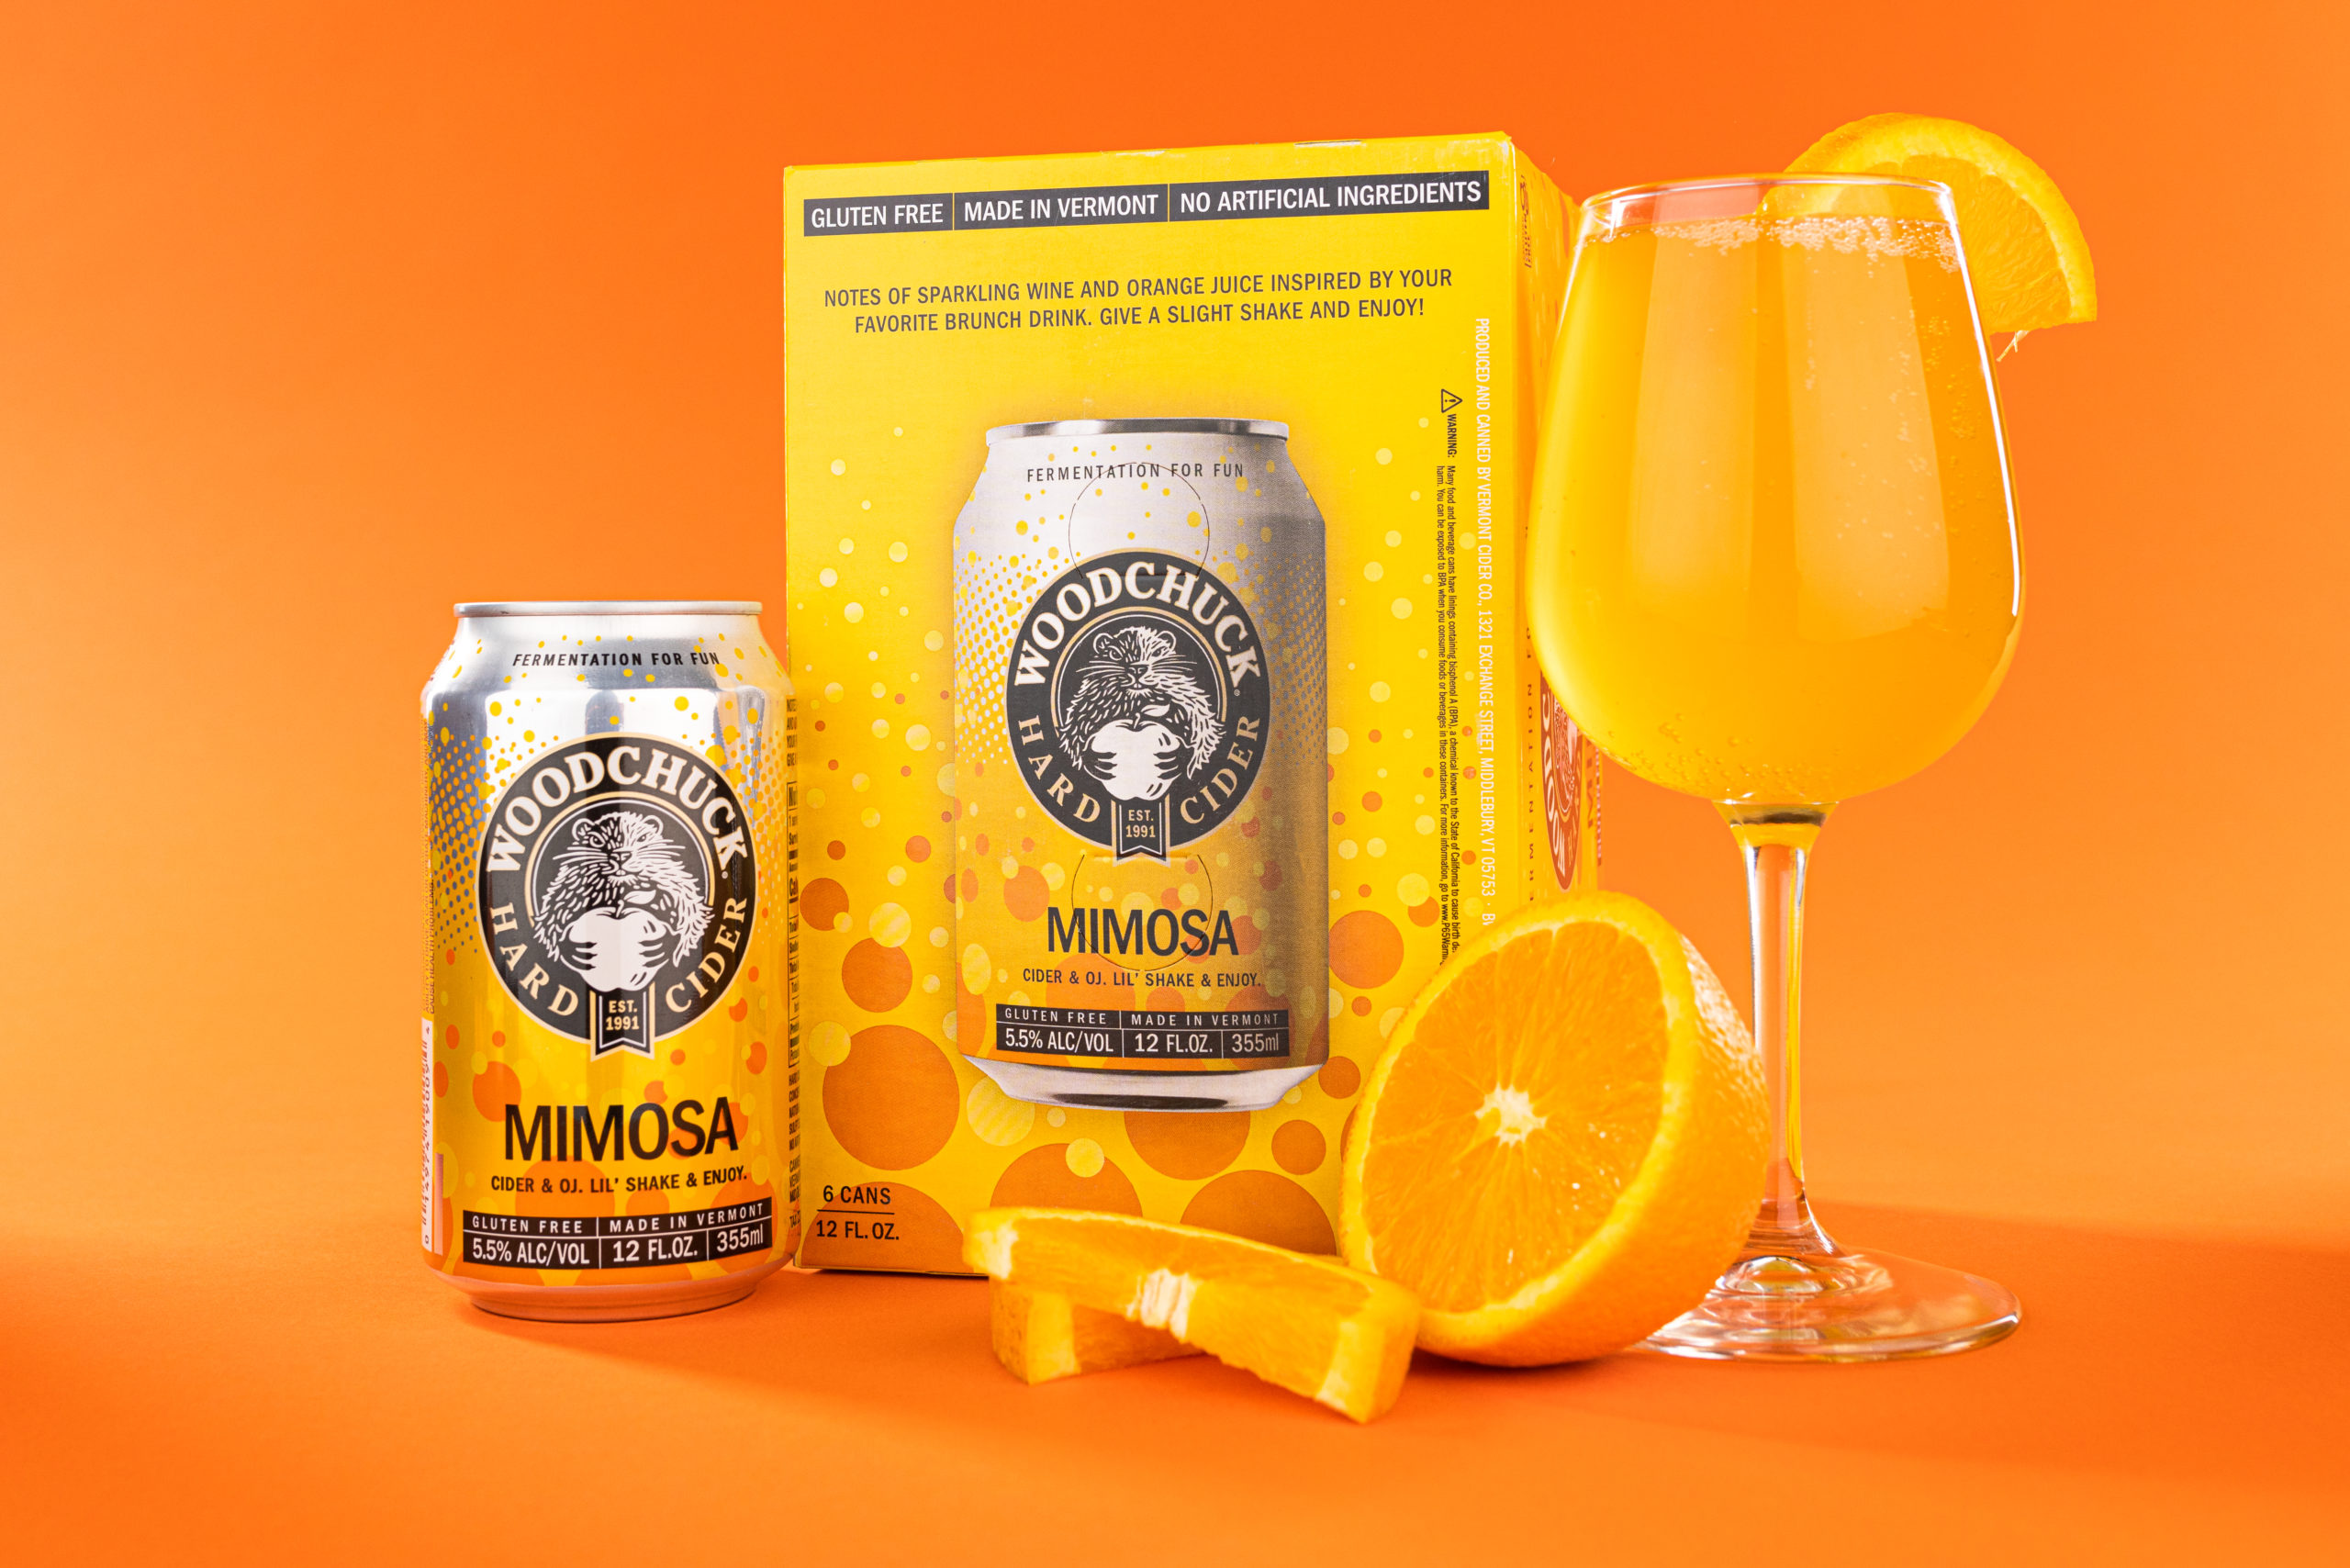 A 12 oz can and a 6 pack of Woodchuck Hard Cider Mimosa - Cider and Oj, Lil' shake and enjoy- next to a tall wine glass filled with orange mimosa Cider and a fresh orange cut in half. The 6 pack reads "Notes of sparkling wine and orange juice inspired by your favorite brunch drink. Give a slight shake and enjoy!"